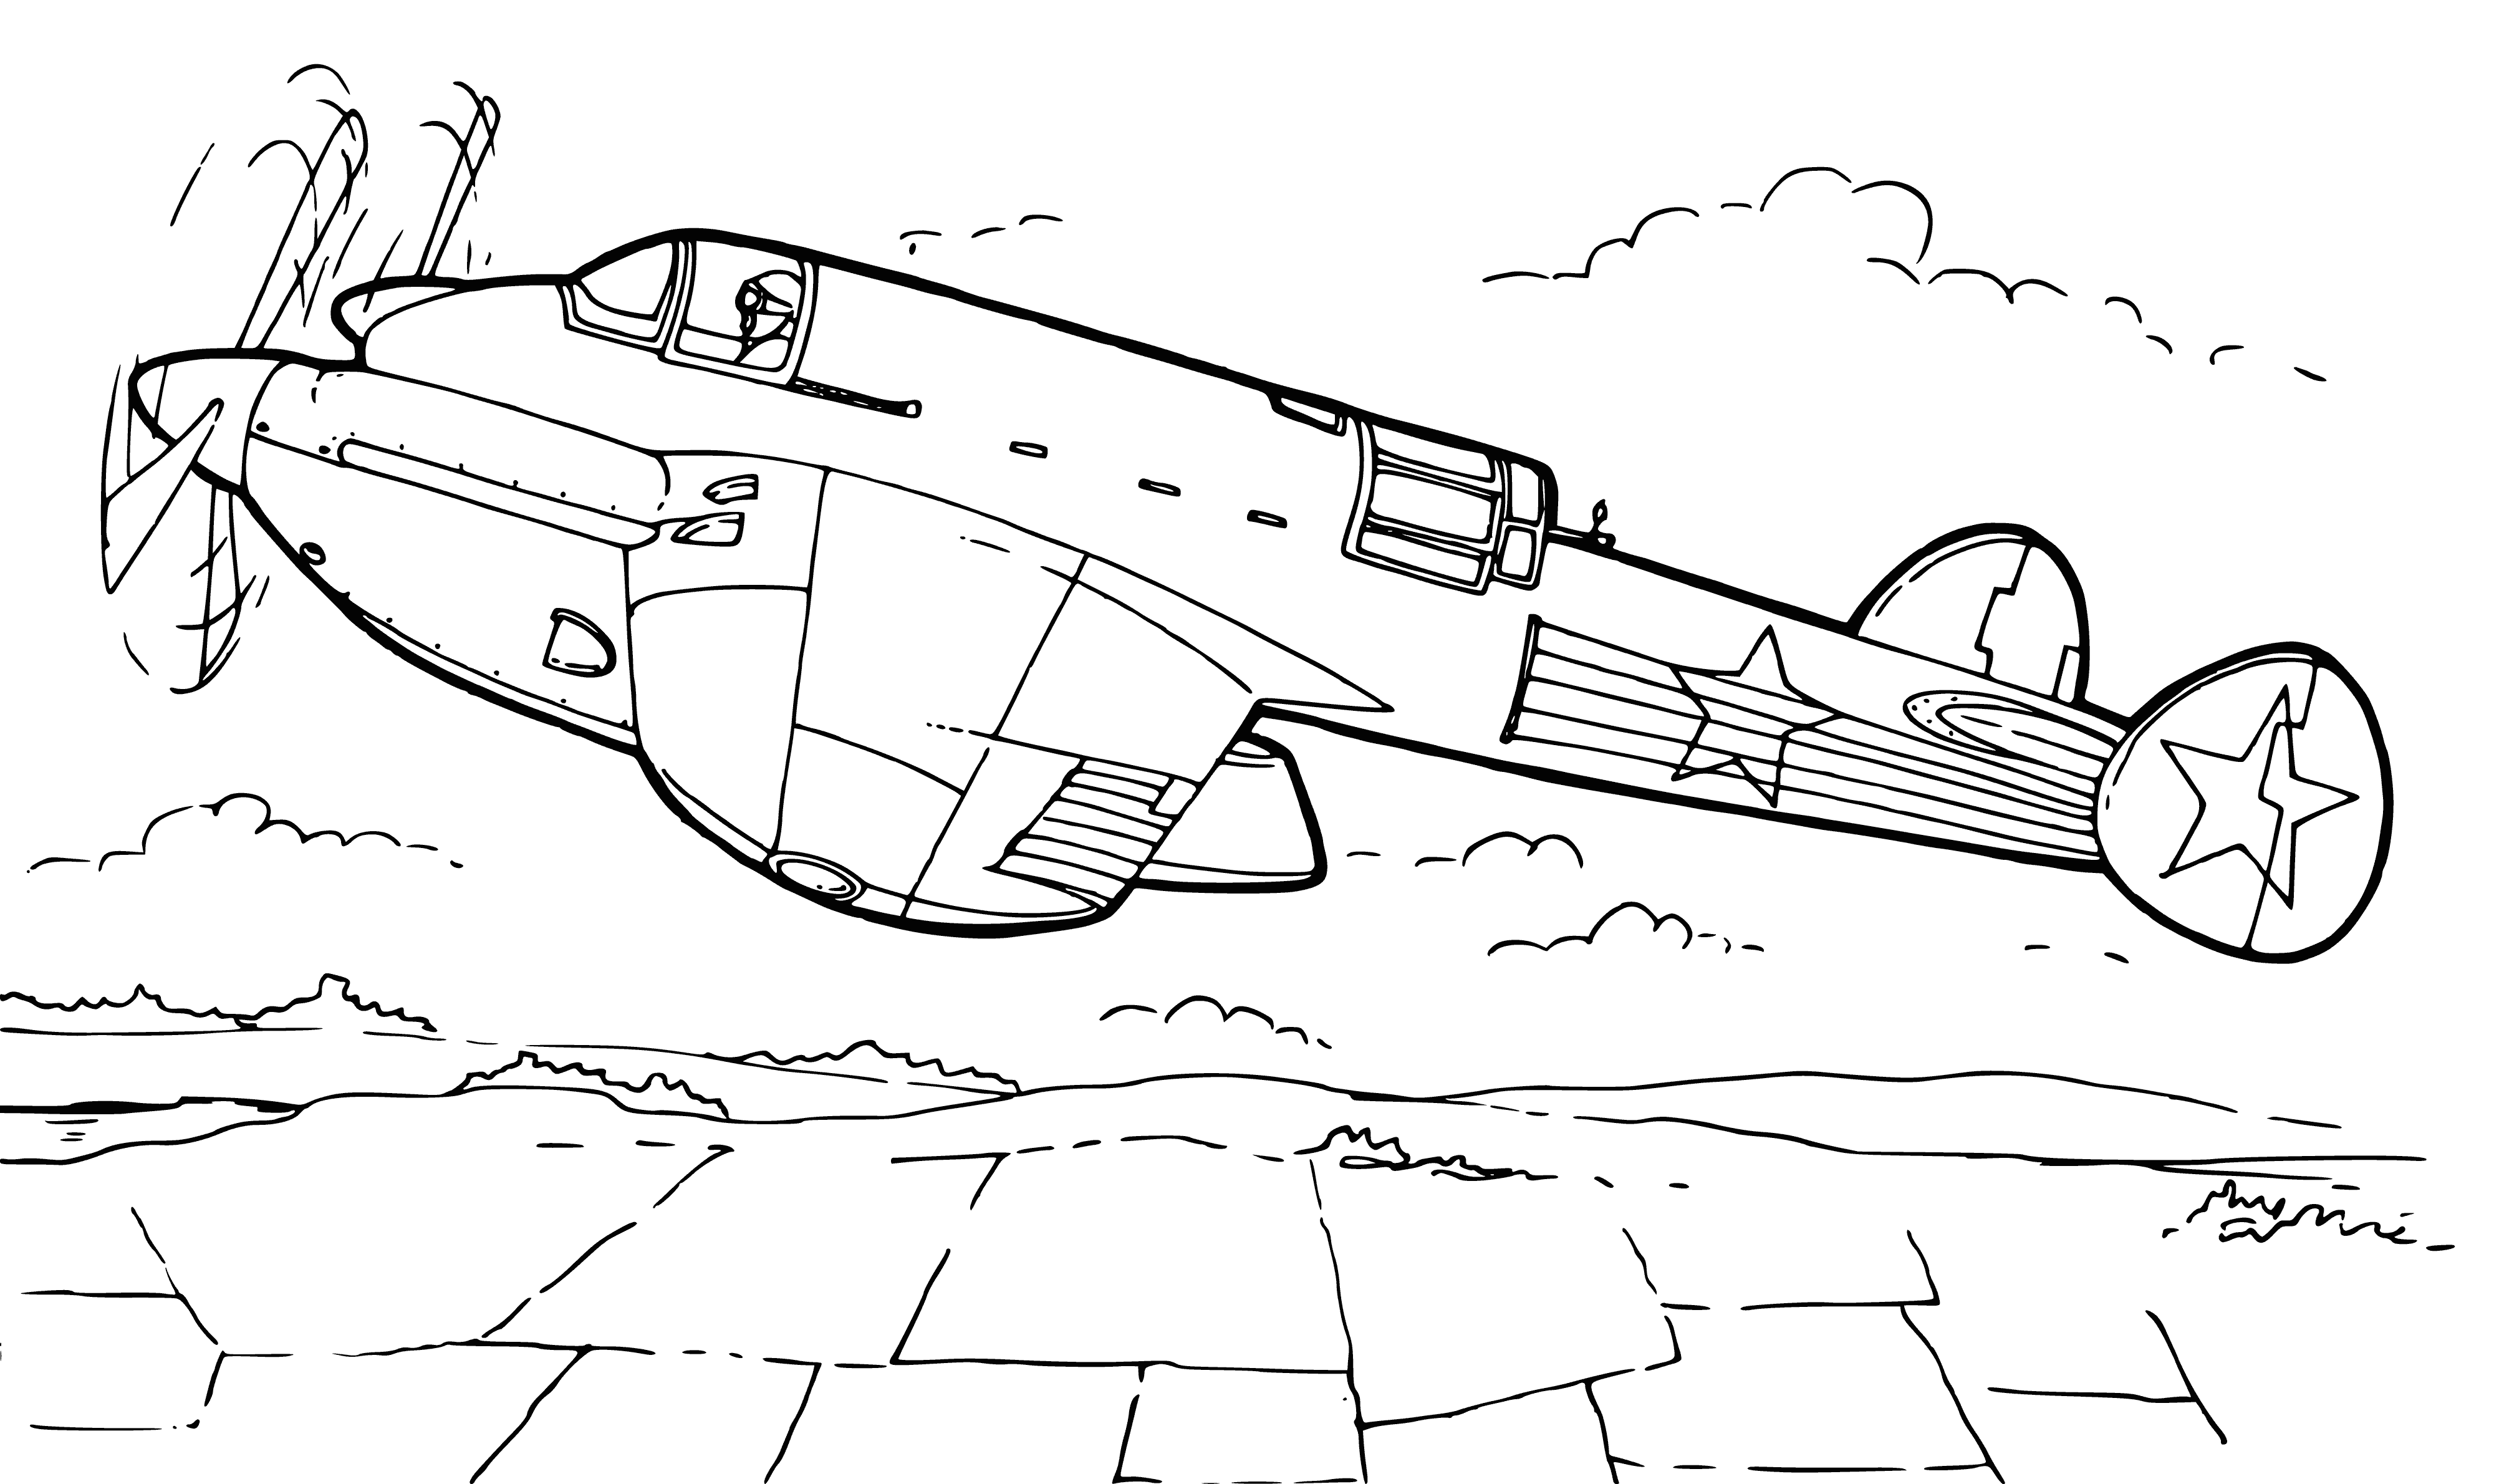 coloring page: High-speed scout plane w/ long, thin wingspan. Sleek, streamlined body & elevated tail, w/ two large engines & visible jets. Flying fast.